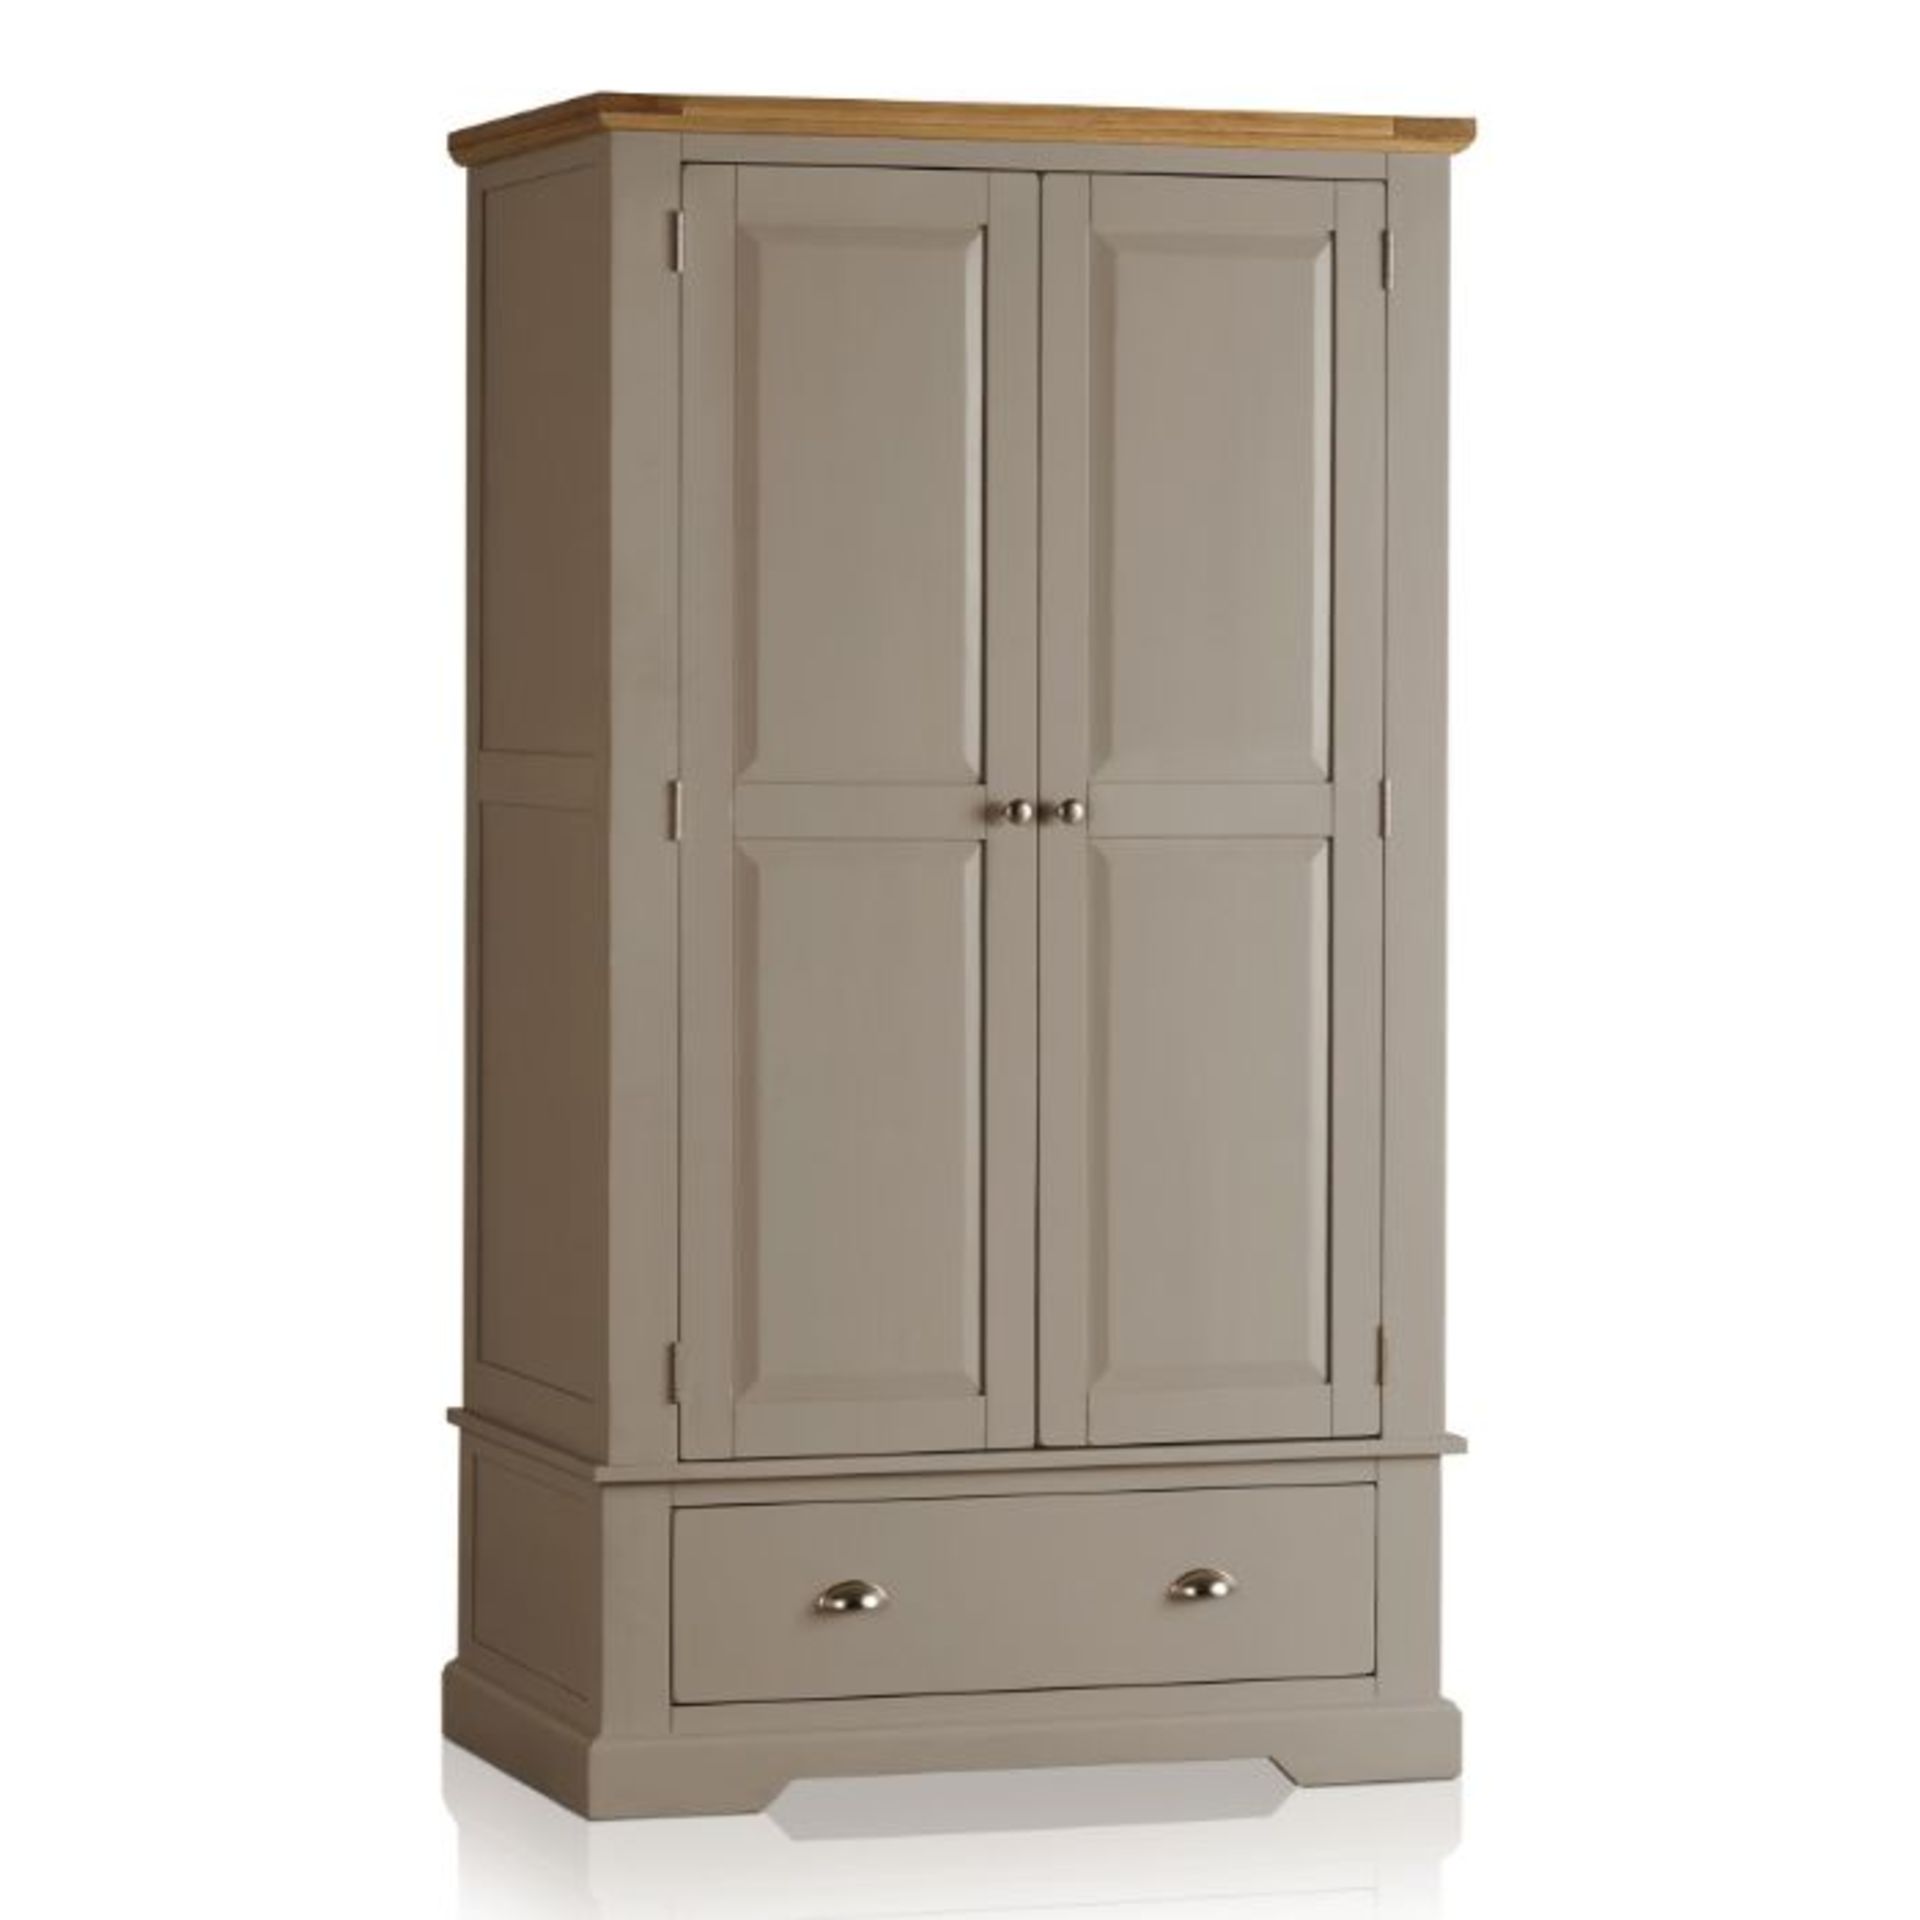 Oak Furnitureland St Ives Natural Oak And Light Grey Painted Double Wardrobe RRP ?694.99 The St Ives